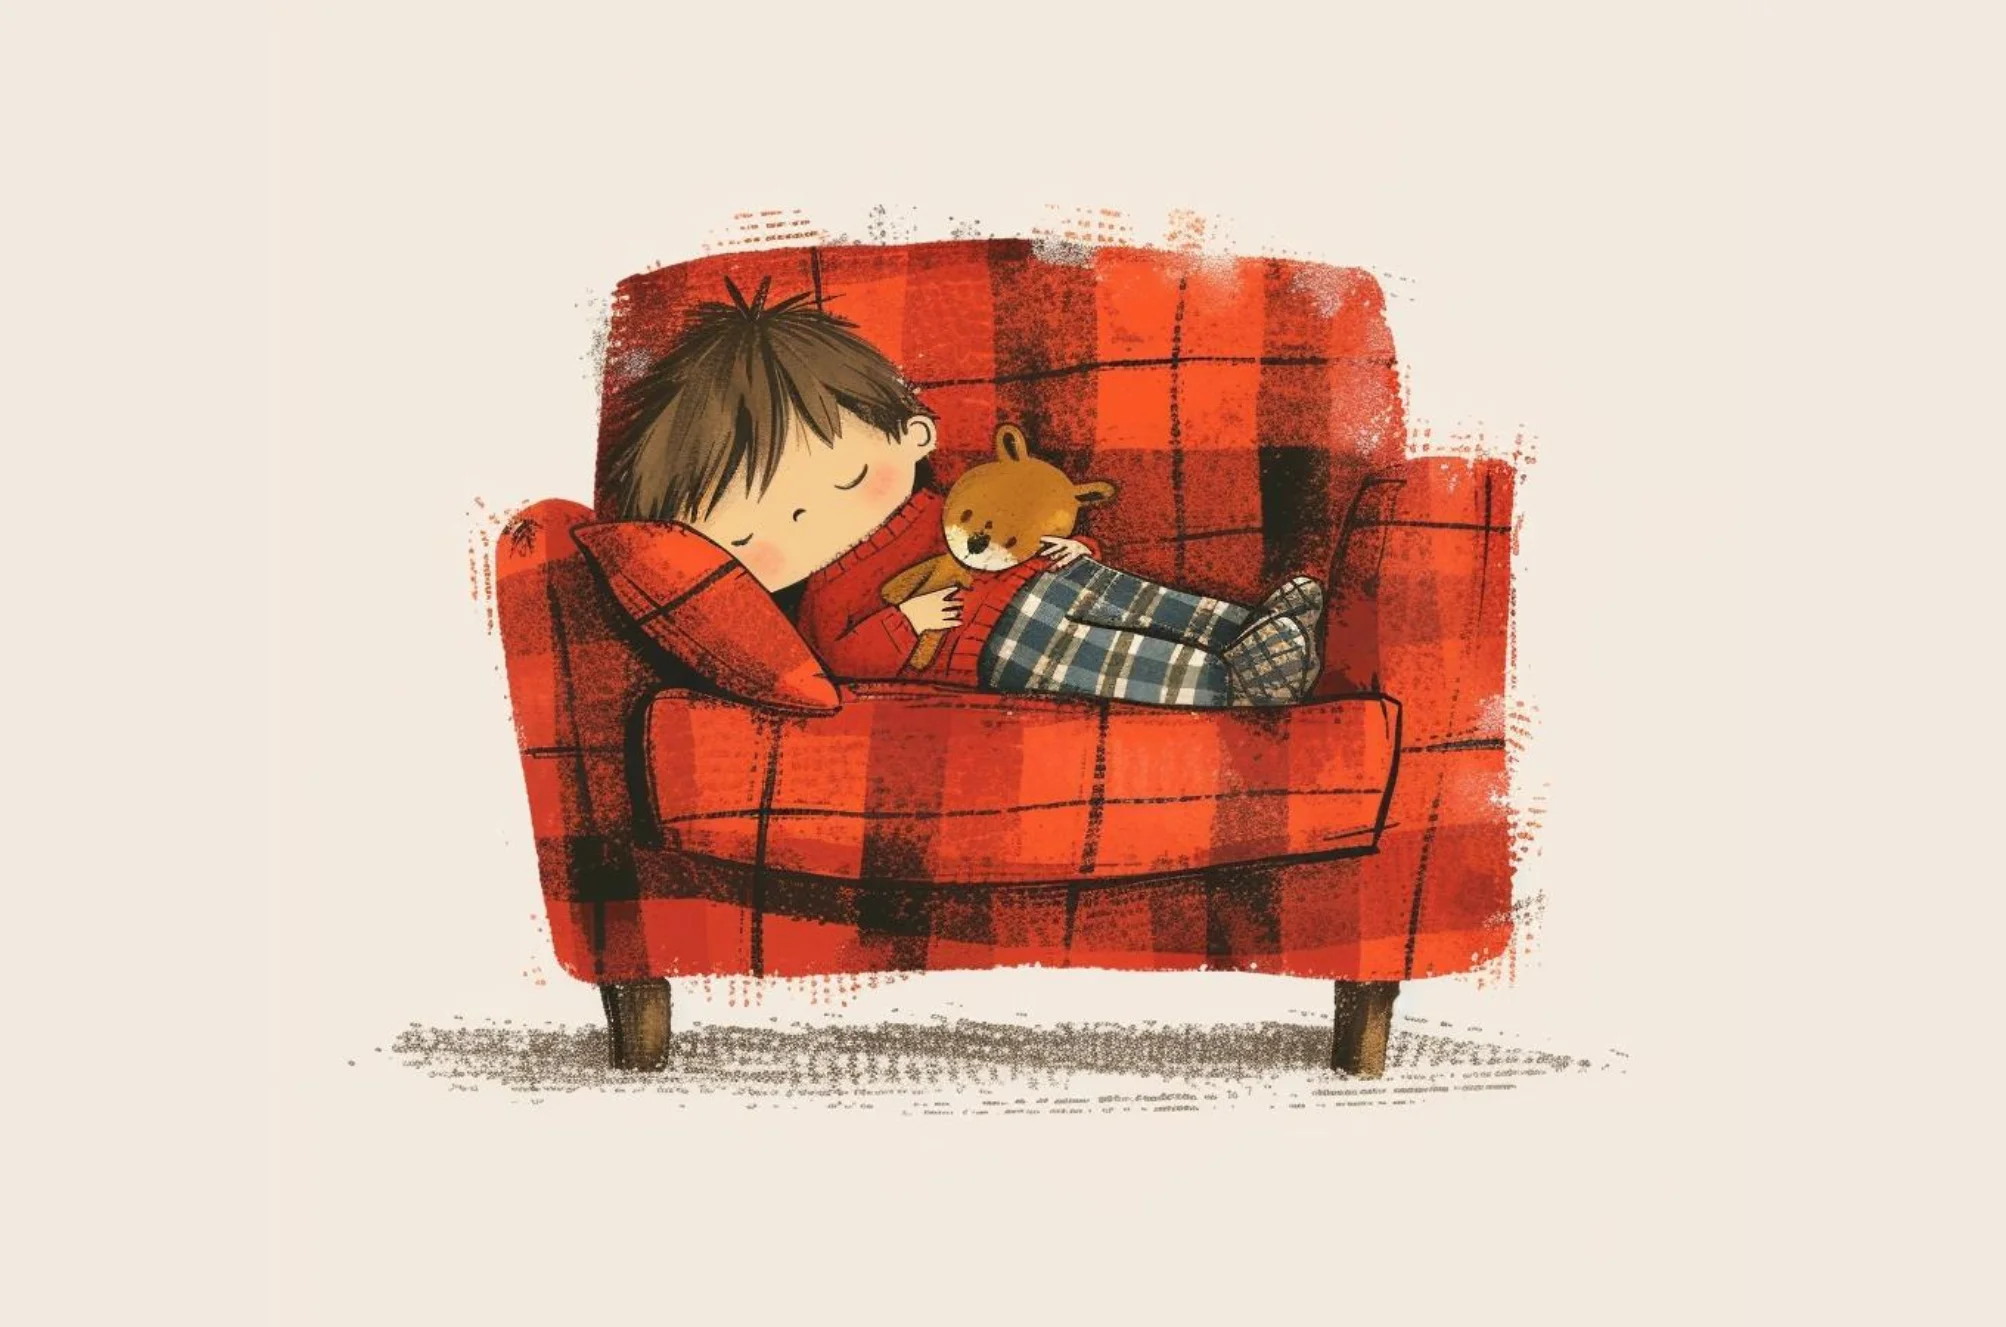 Child napping peacefully with teddy bear on red checkered couch with cozy cushion illustration